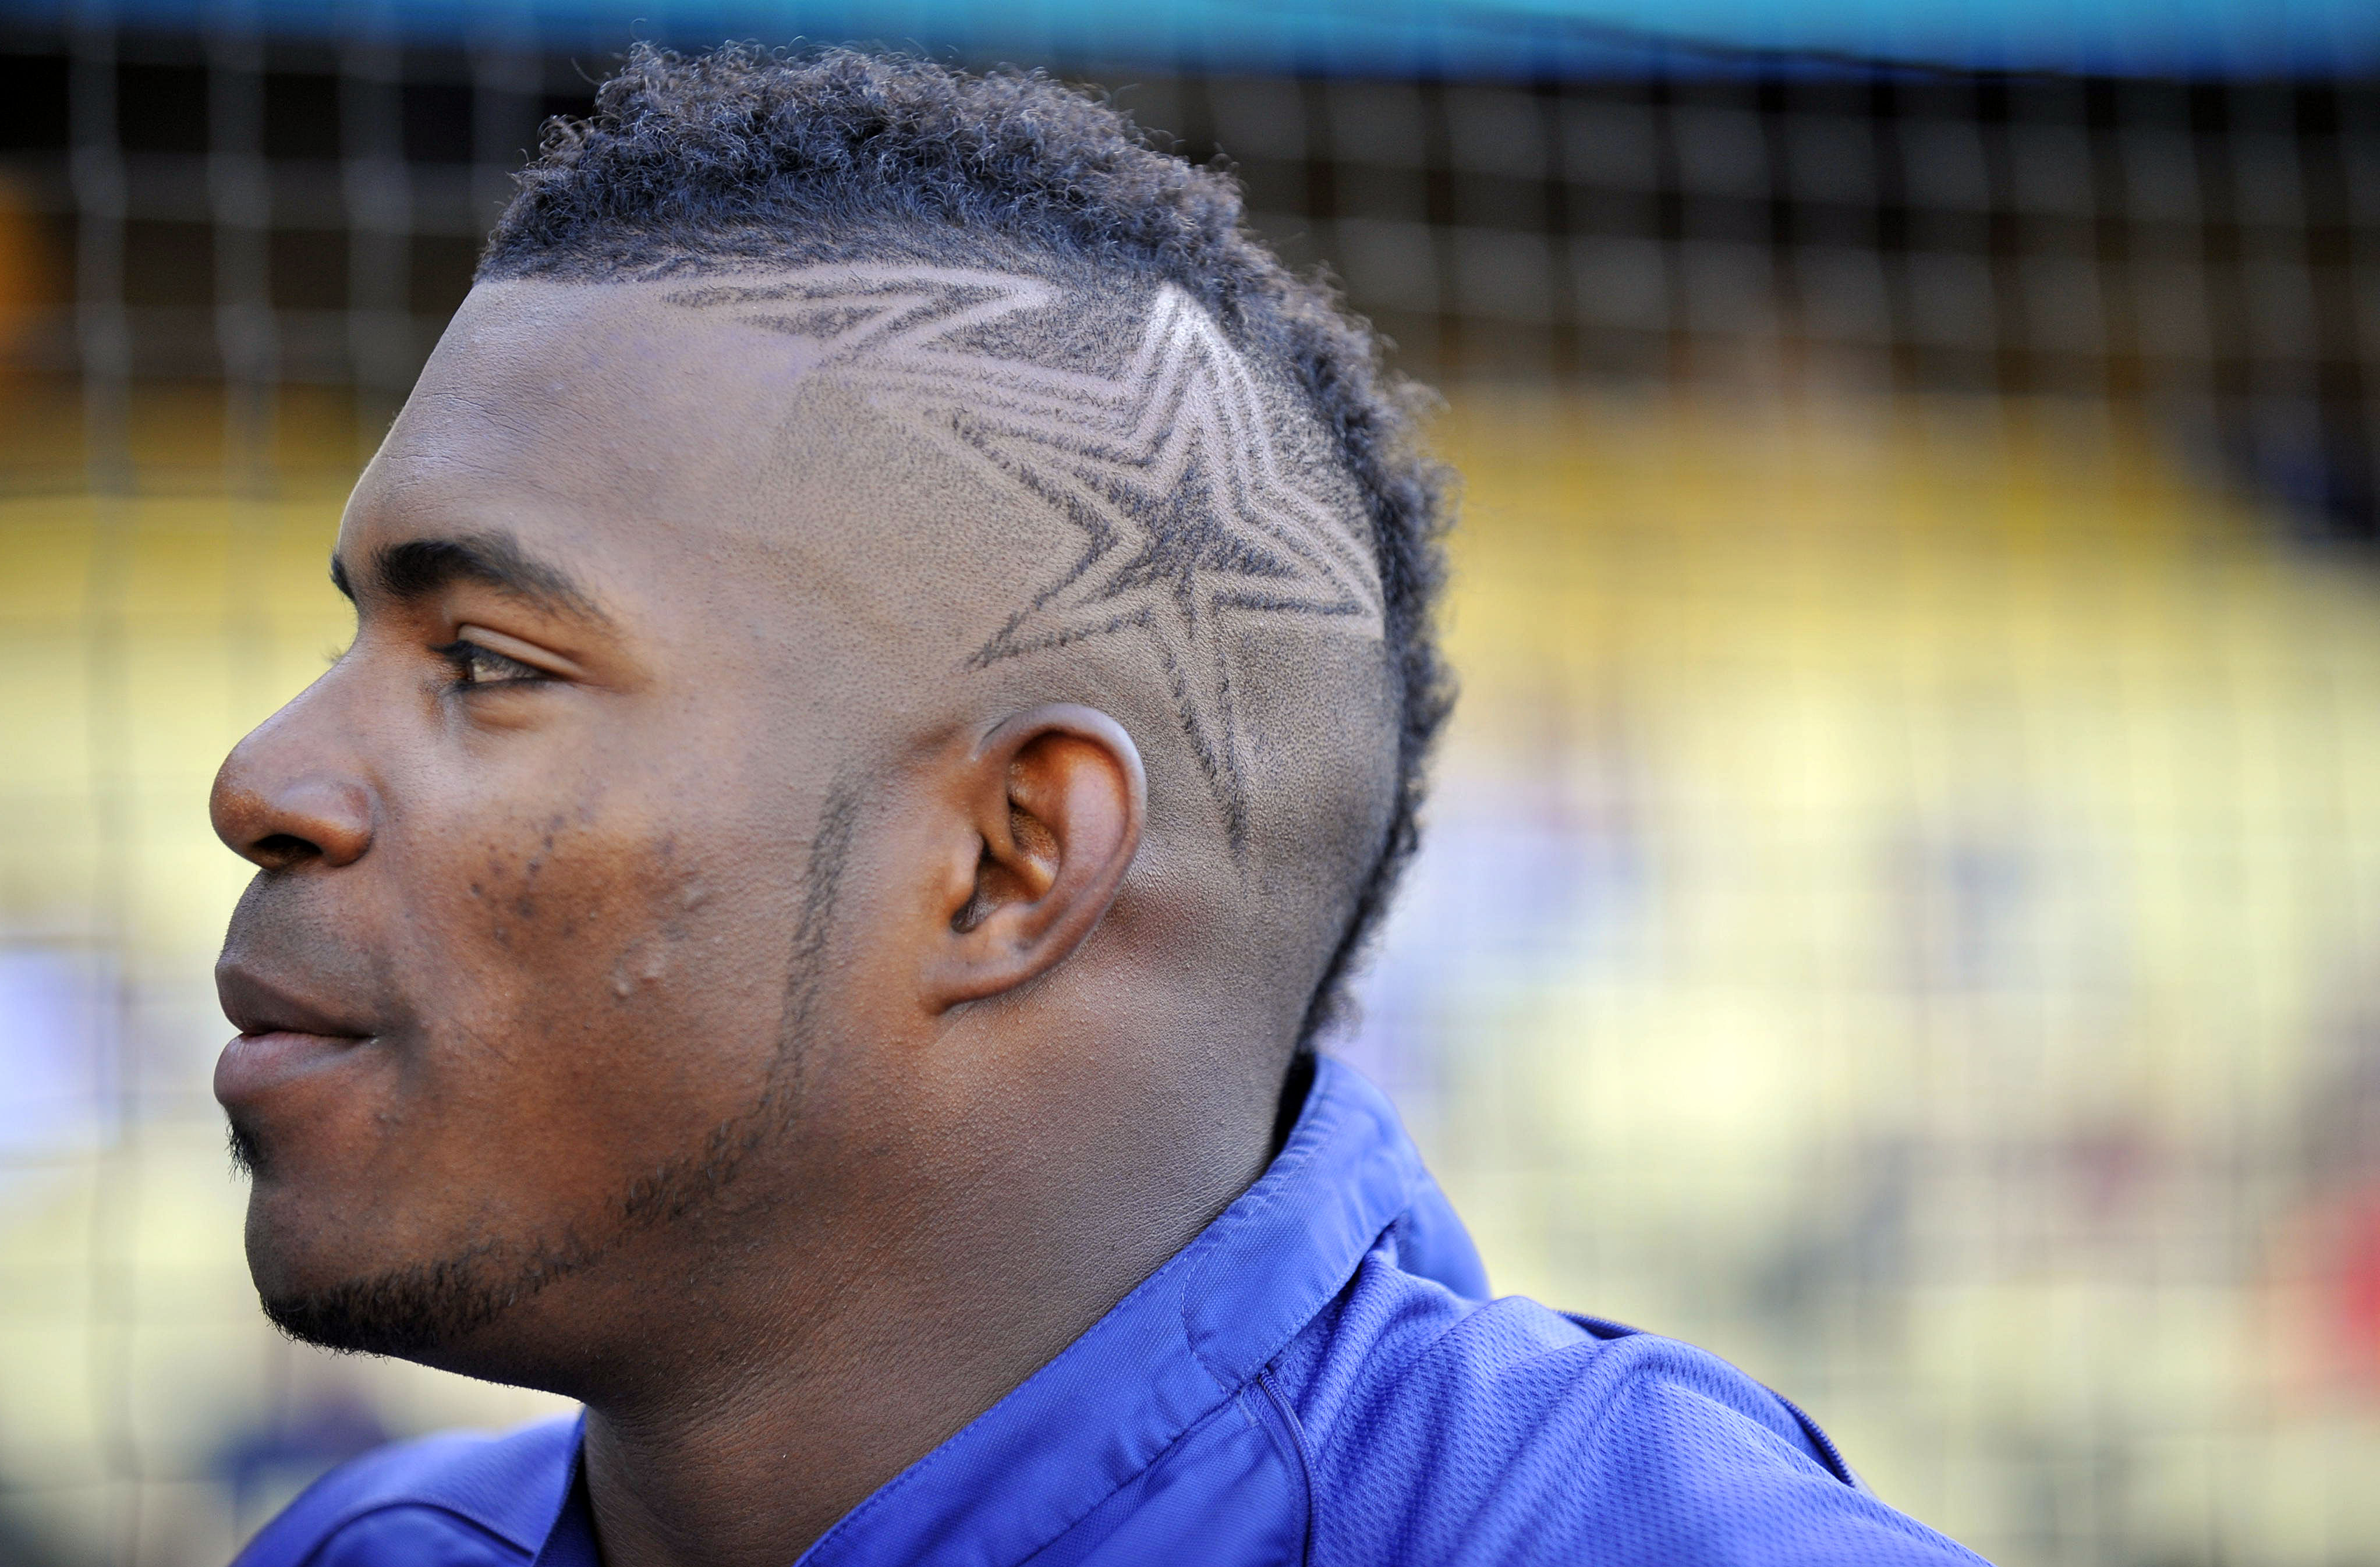 Yasiel Puig has a special haircut for the All-Star game